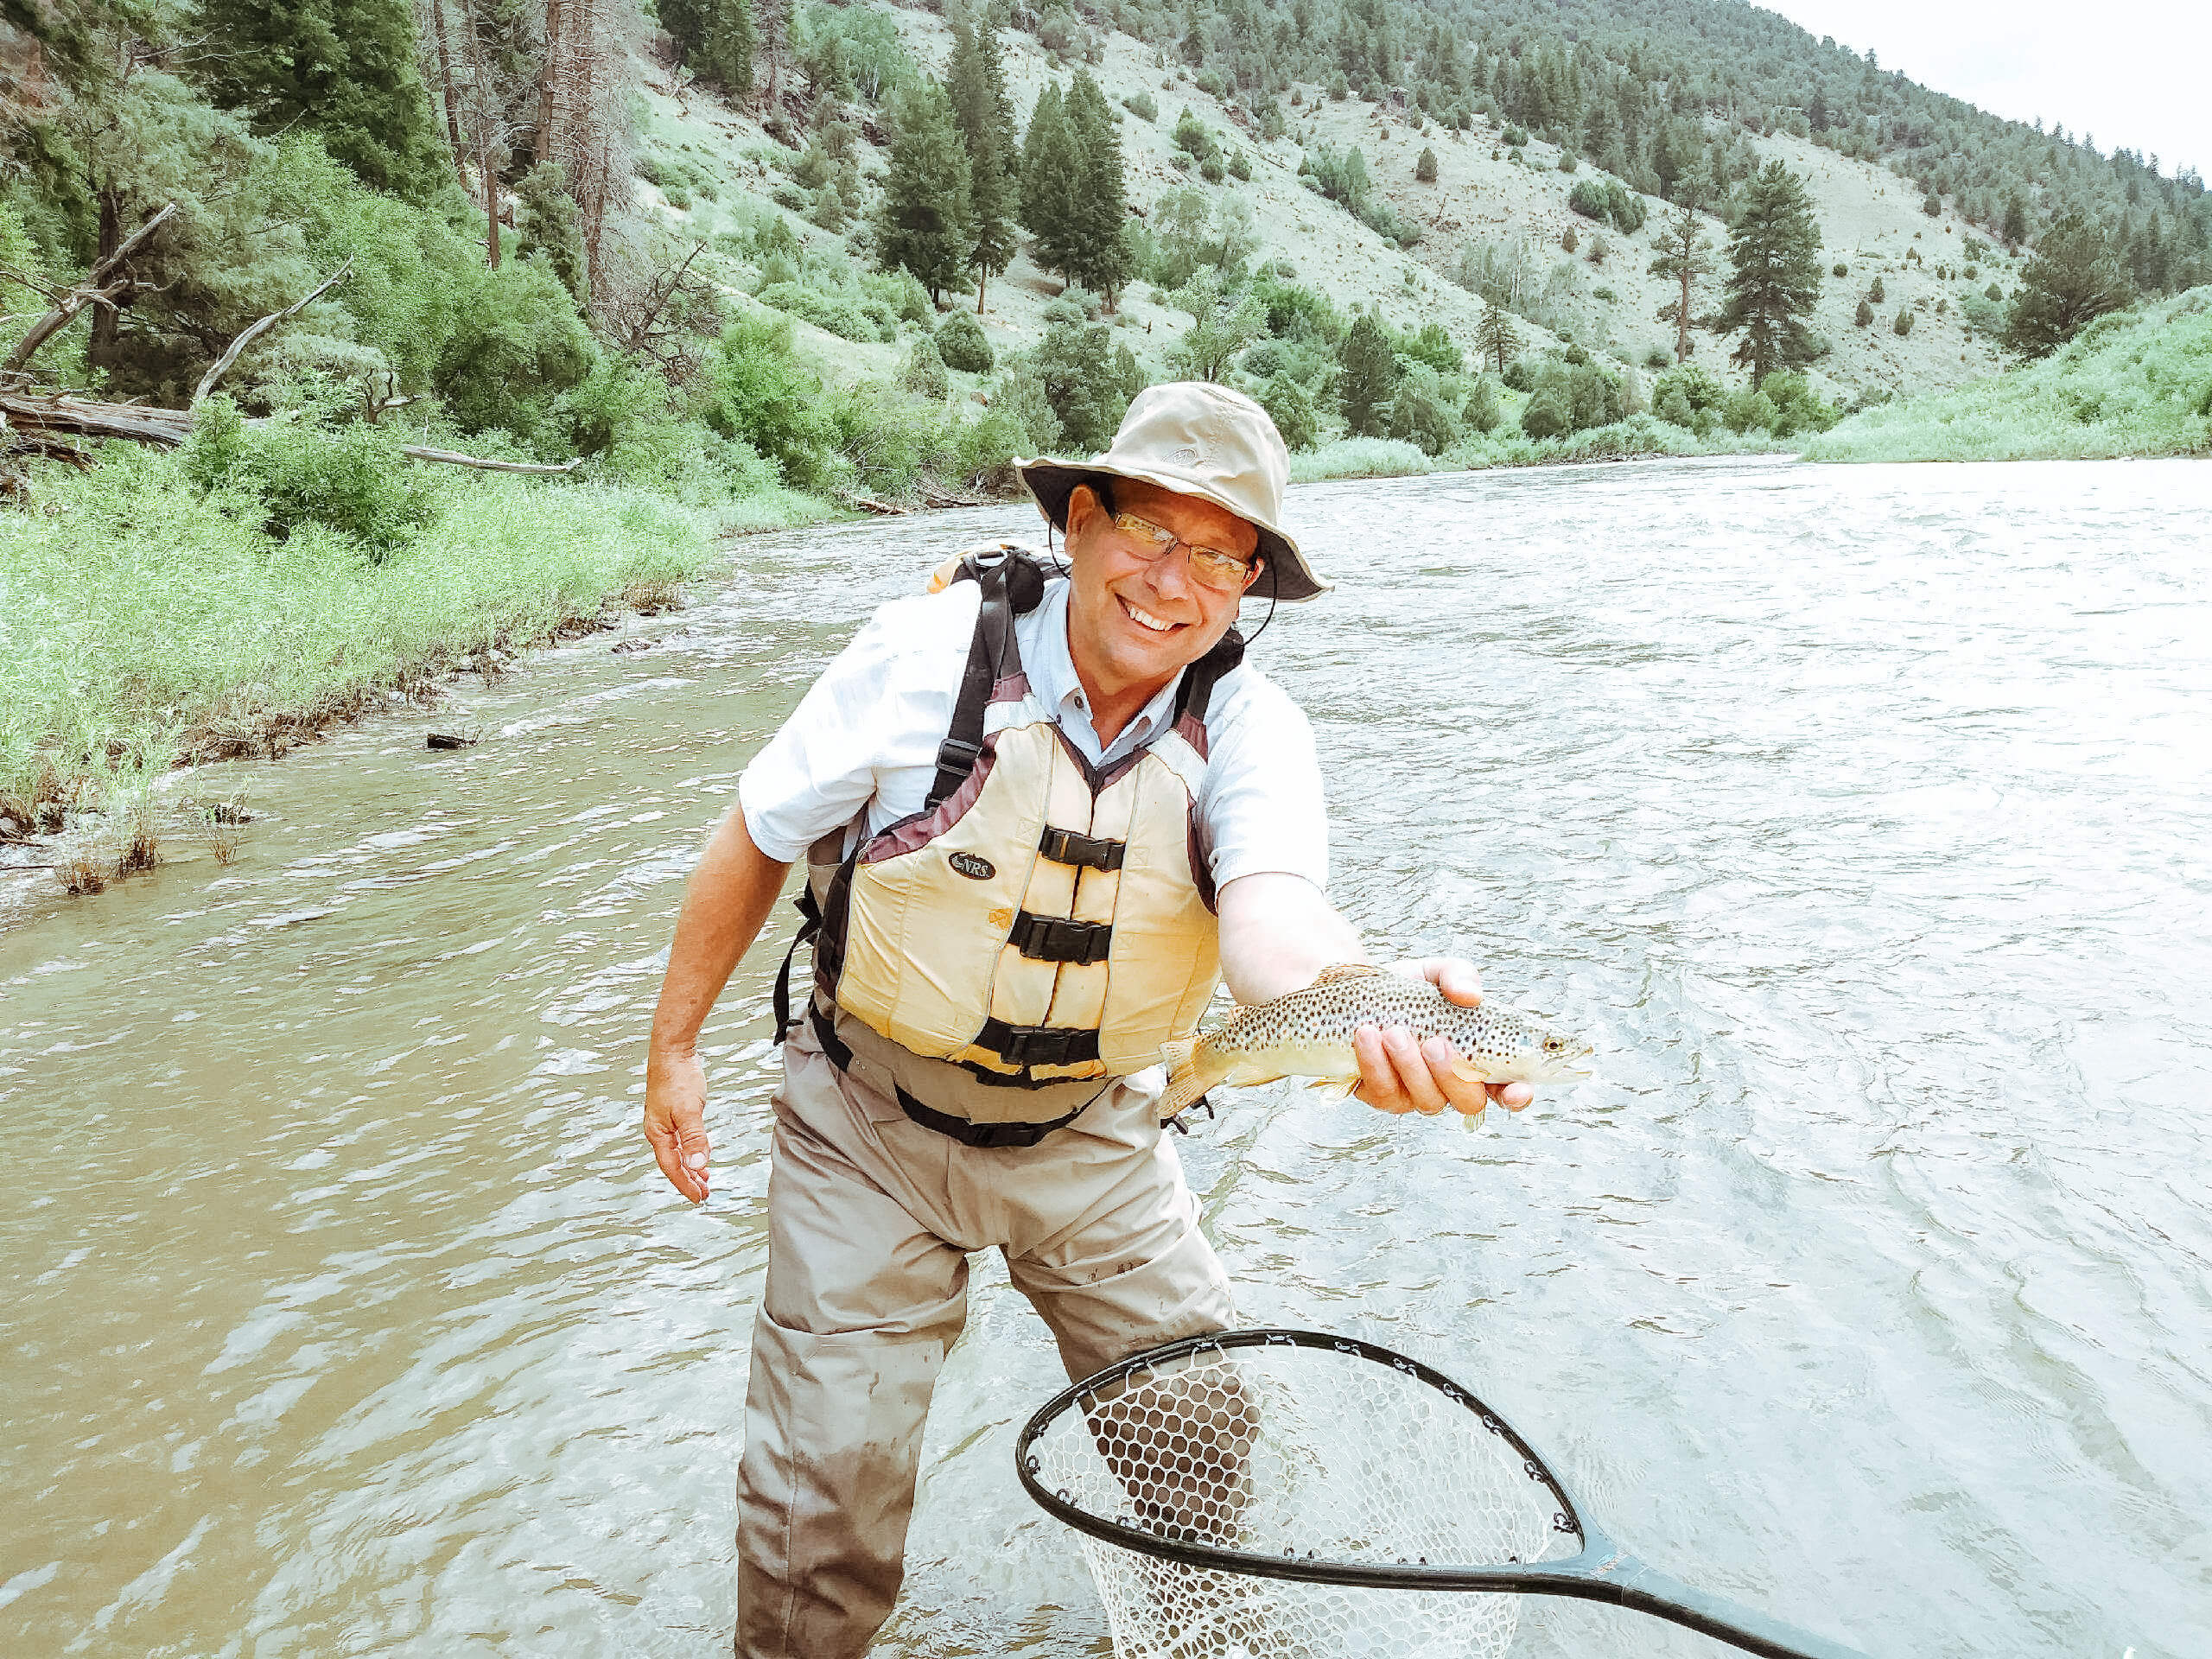 Fly fishing on the Colorado River